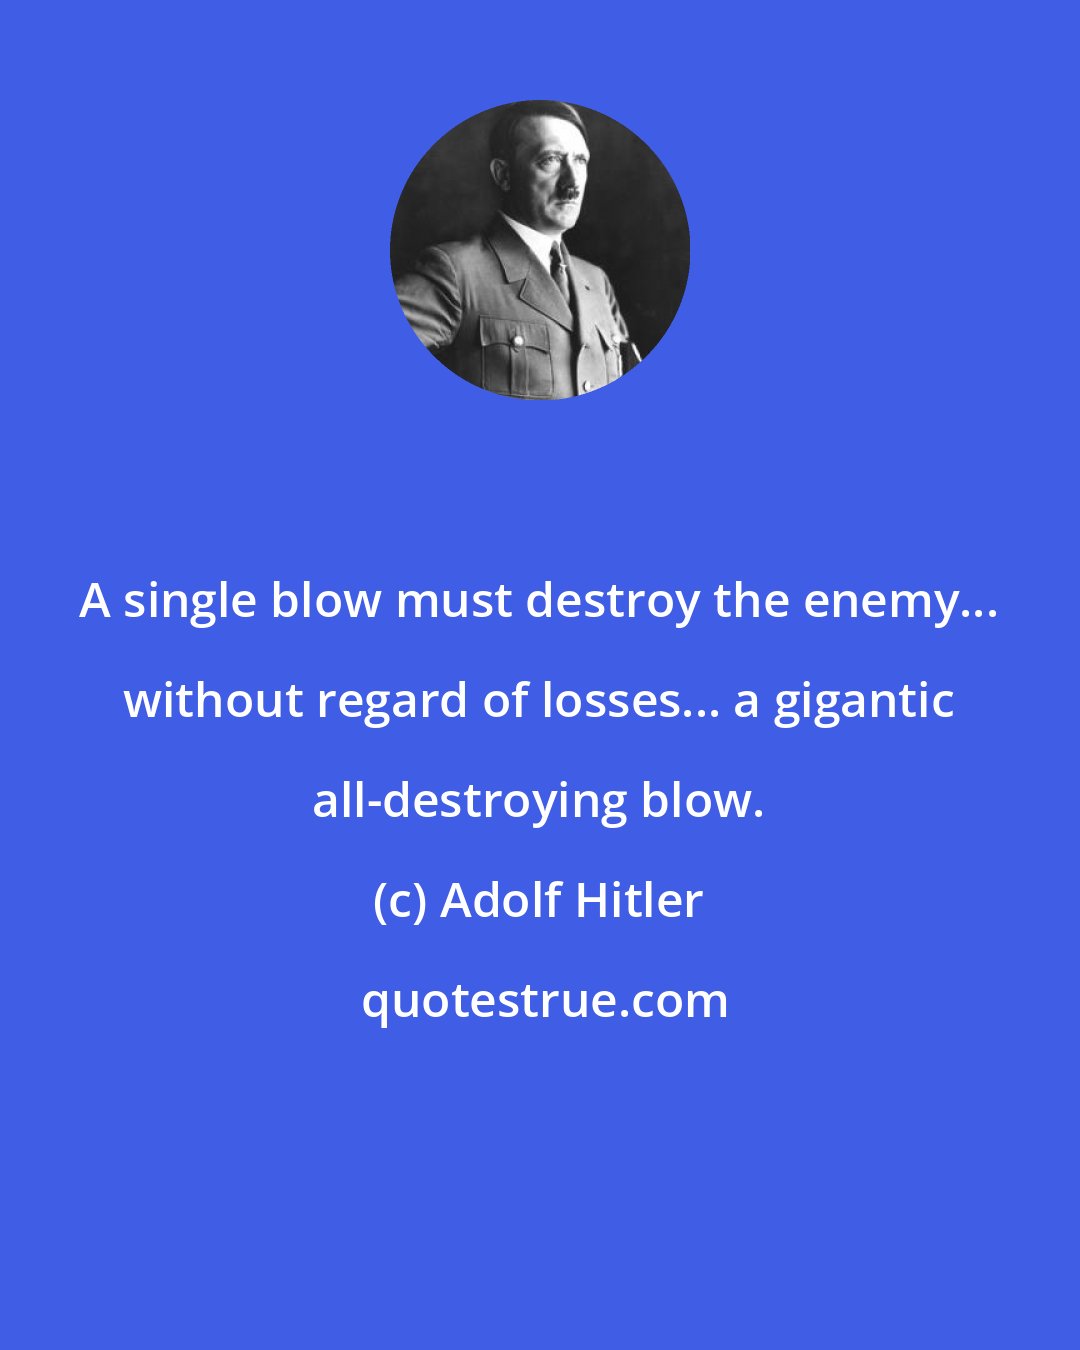 Adolf Hitler: A single blow must destroy the enemy... without regard of losses... a gigantic all-destroying blow.